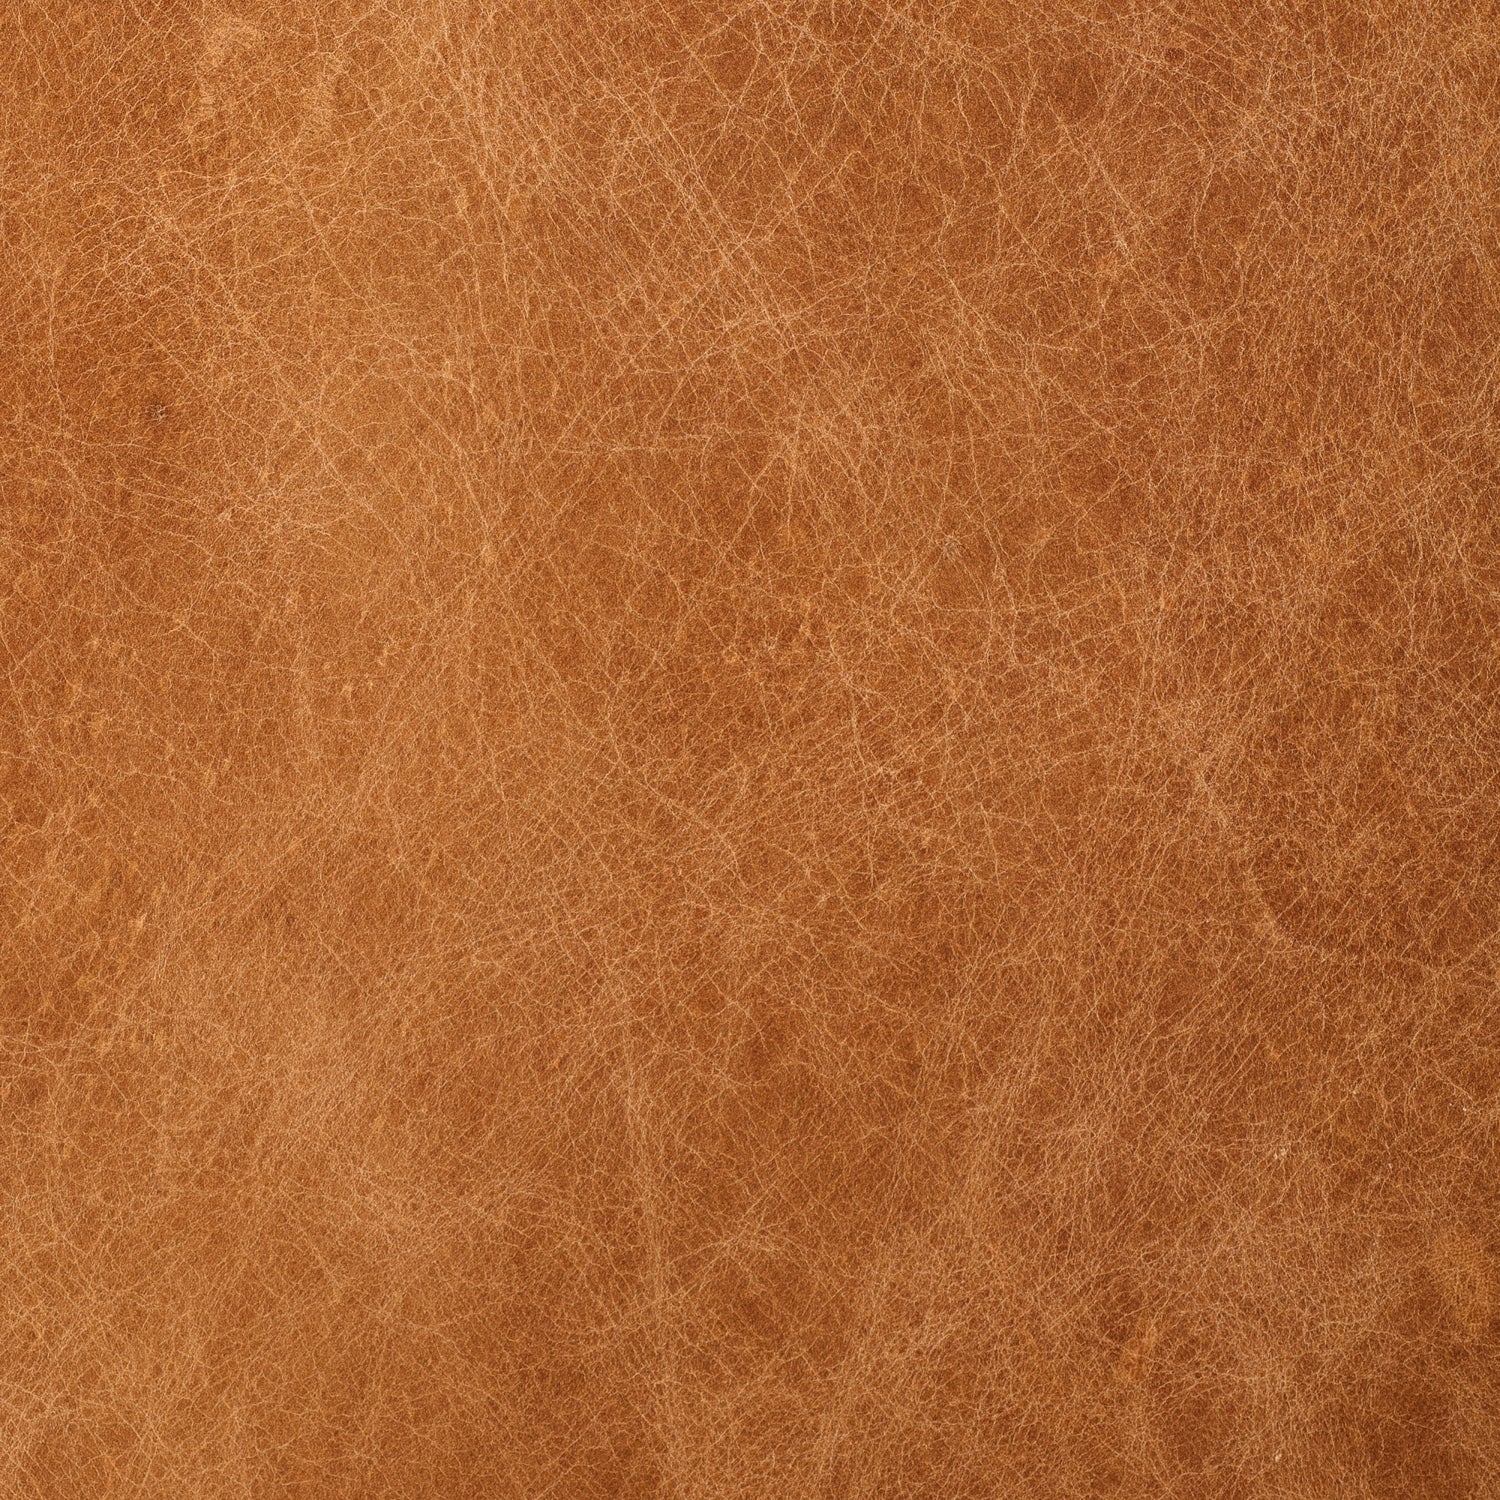 Italian Tanned Leather Swatches Cognac Tan